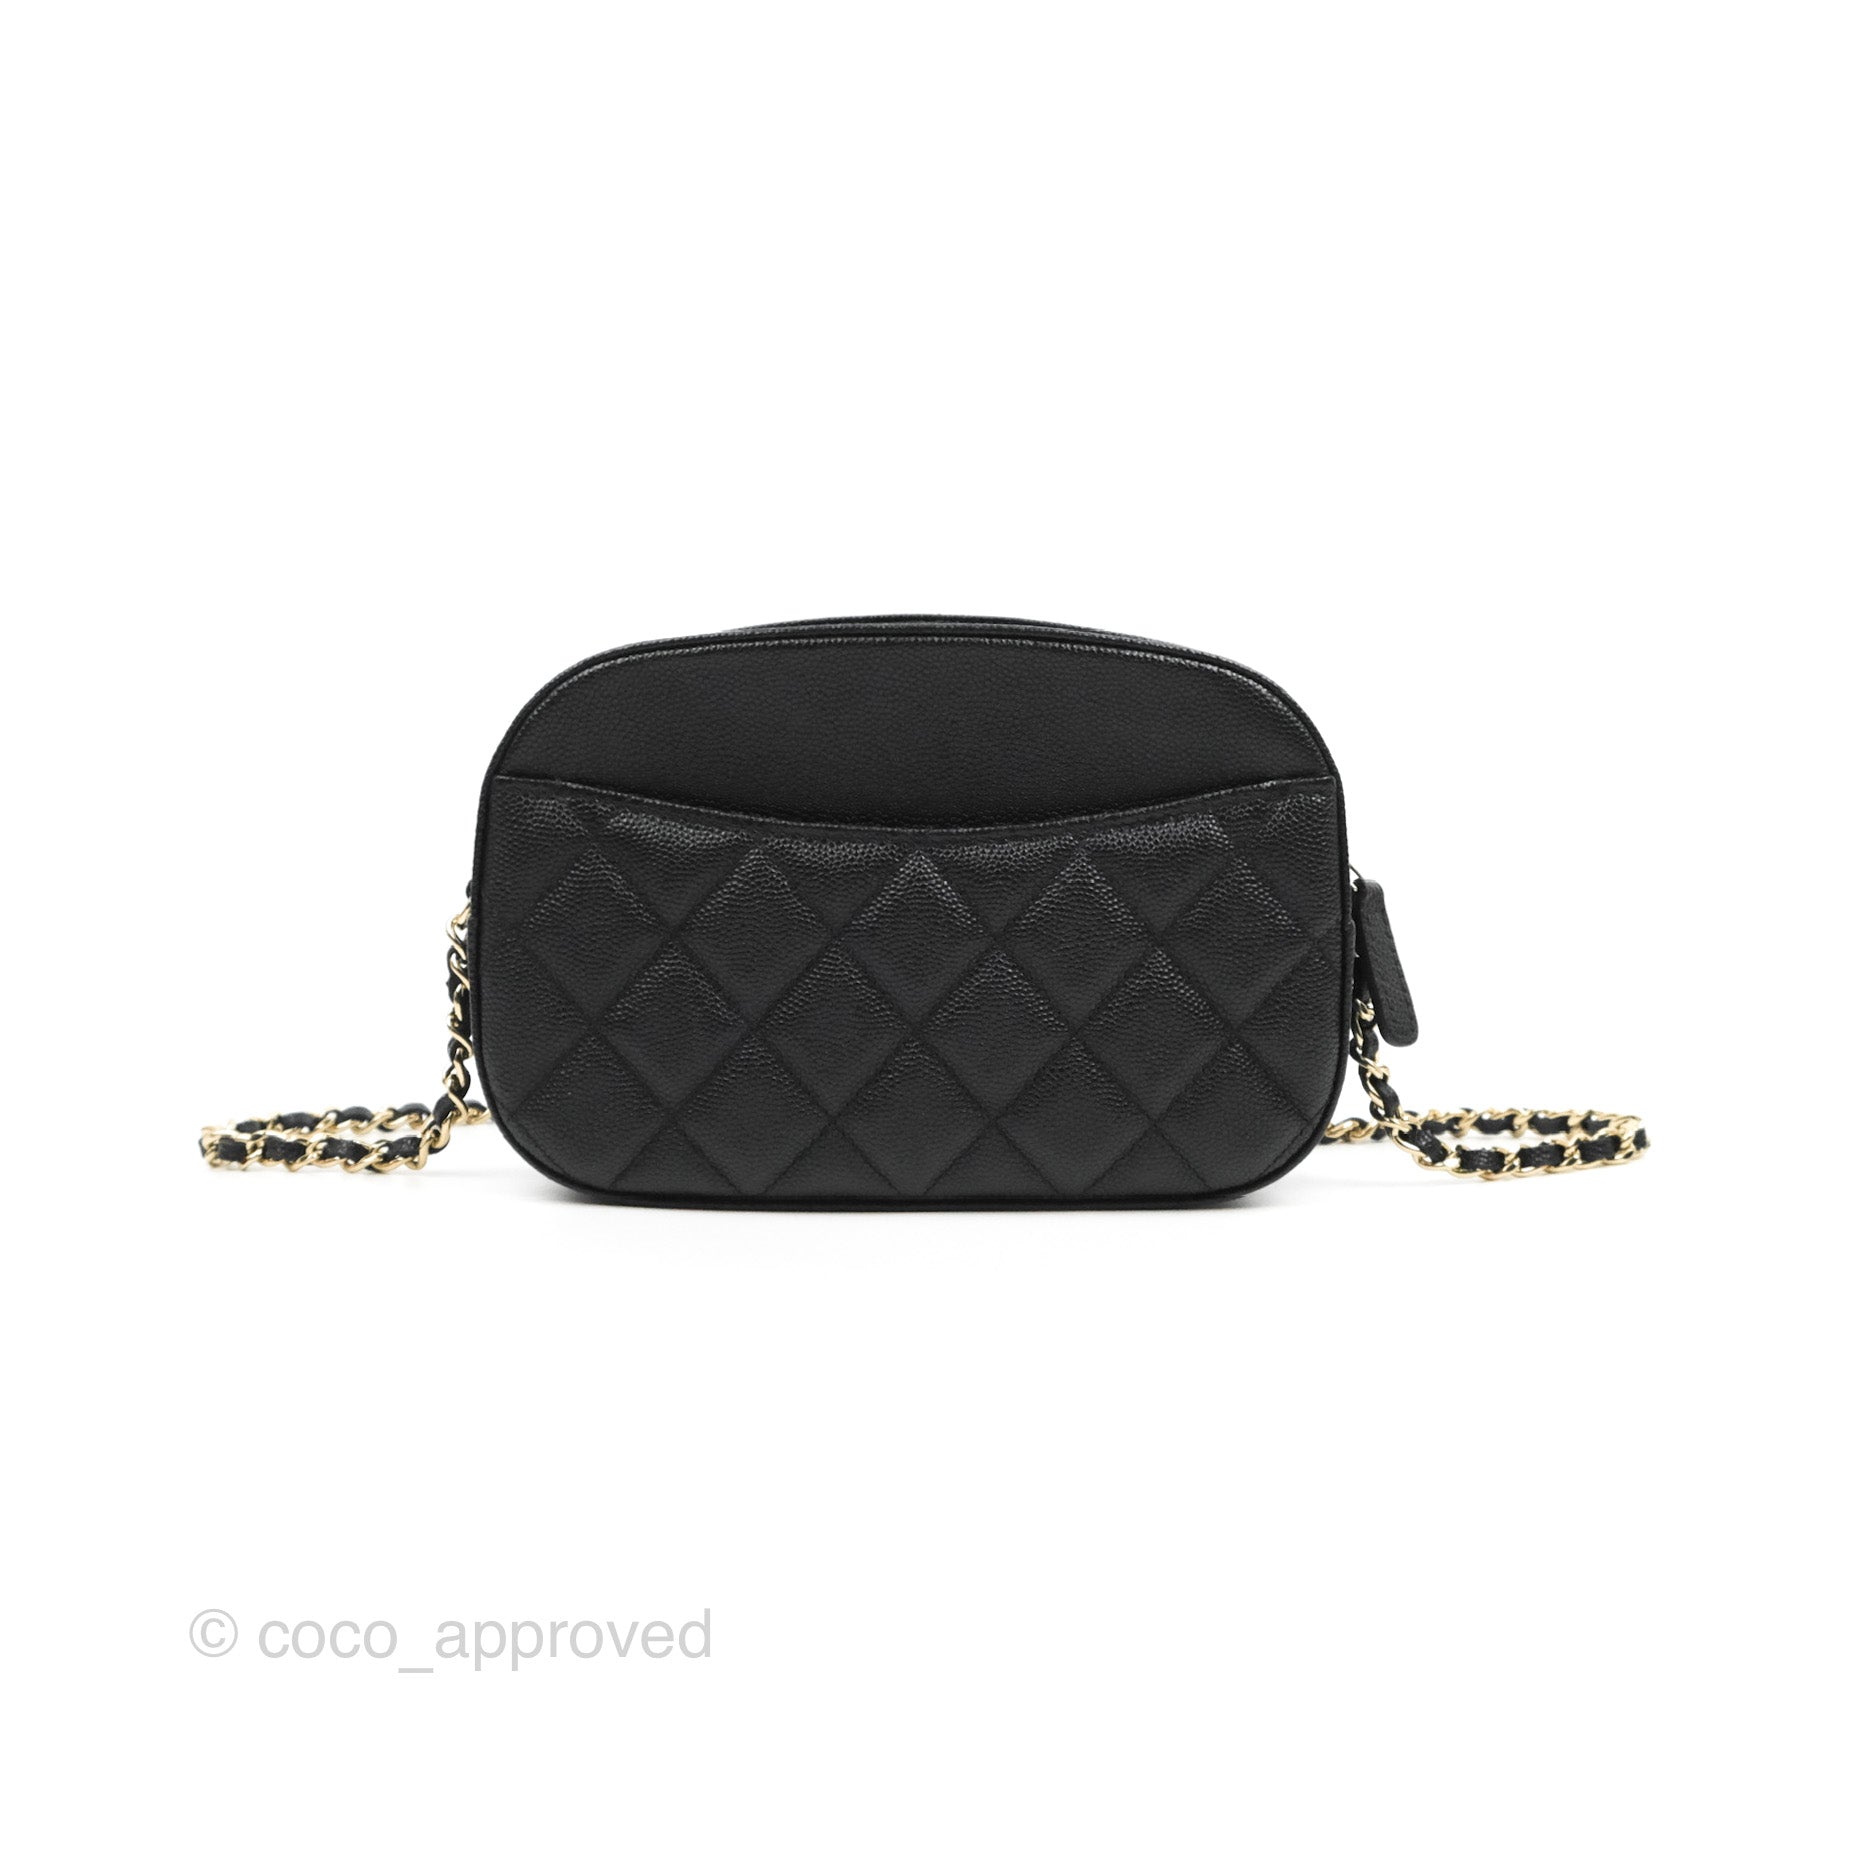 CHANEL 21K Black Caviar Small Camera Case Bag Silver Hardware – AYAINLOVE  CURATED LUXURIES